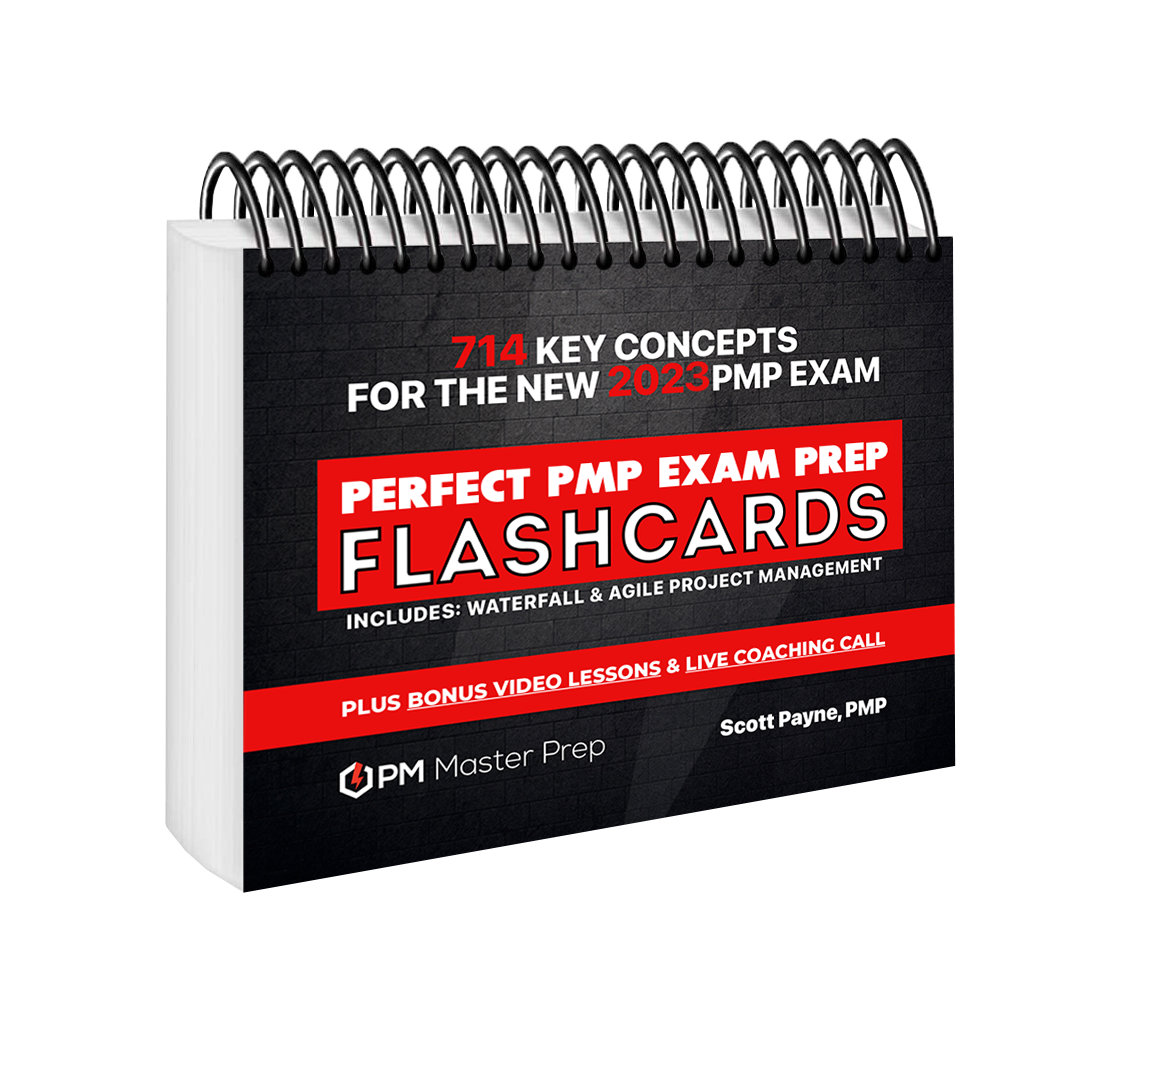 PMP Exam Prep Flashcards perfect for the new PMP Exam by PM Master Prep